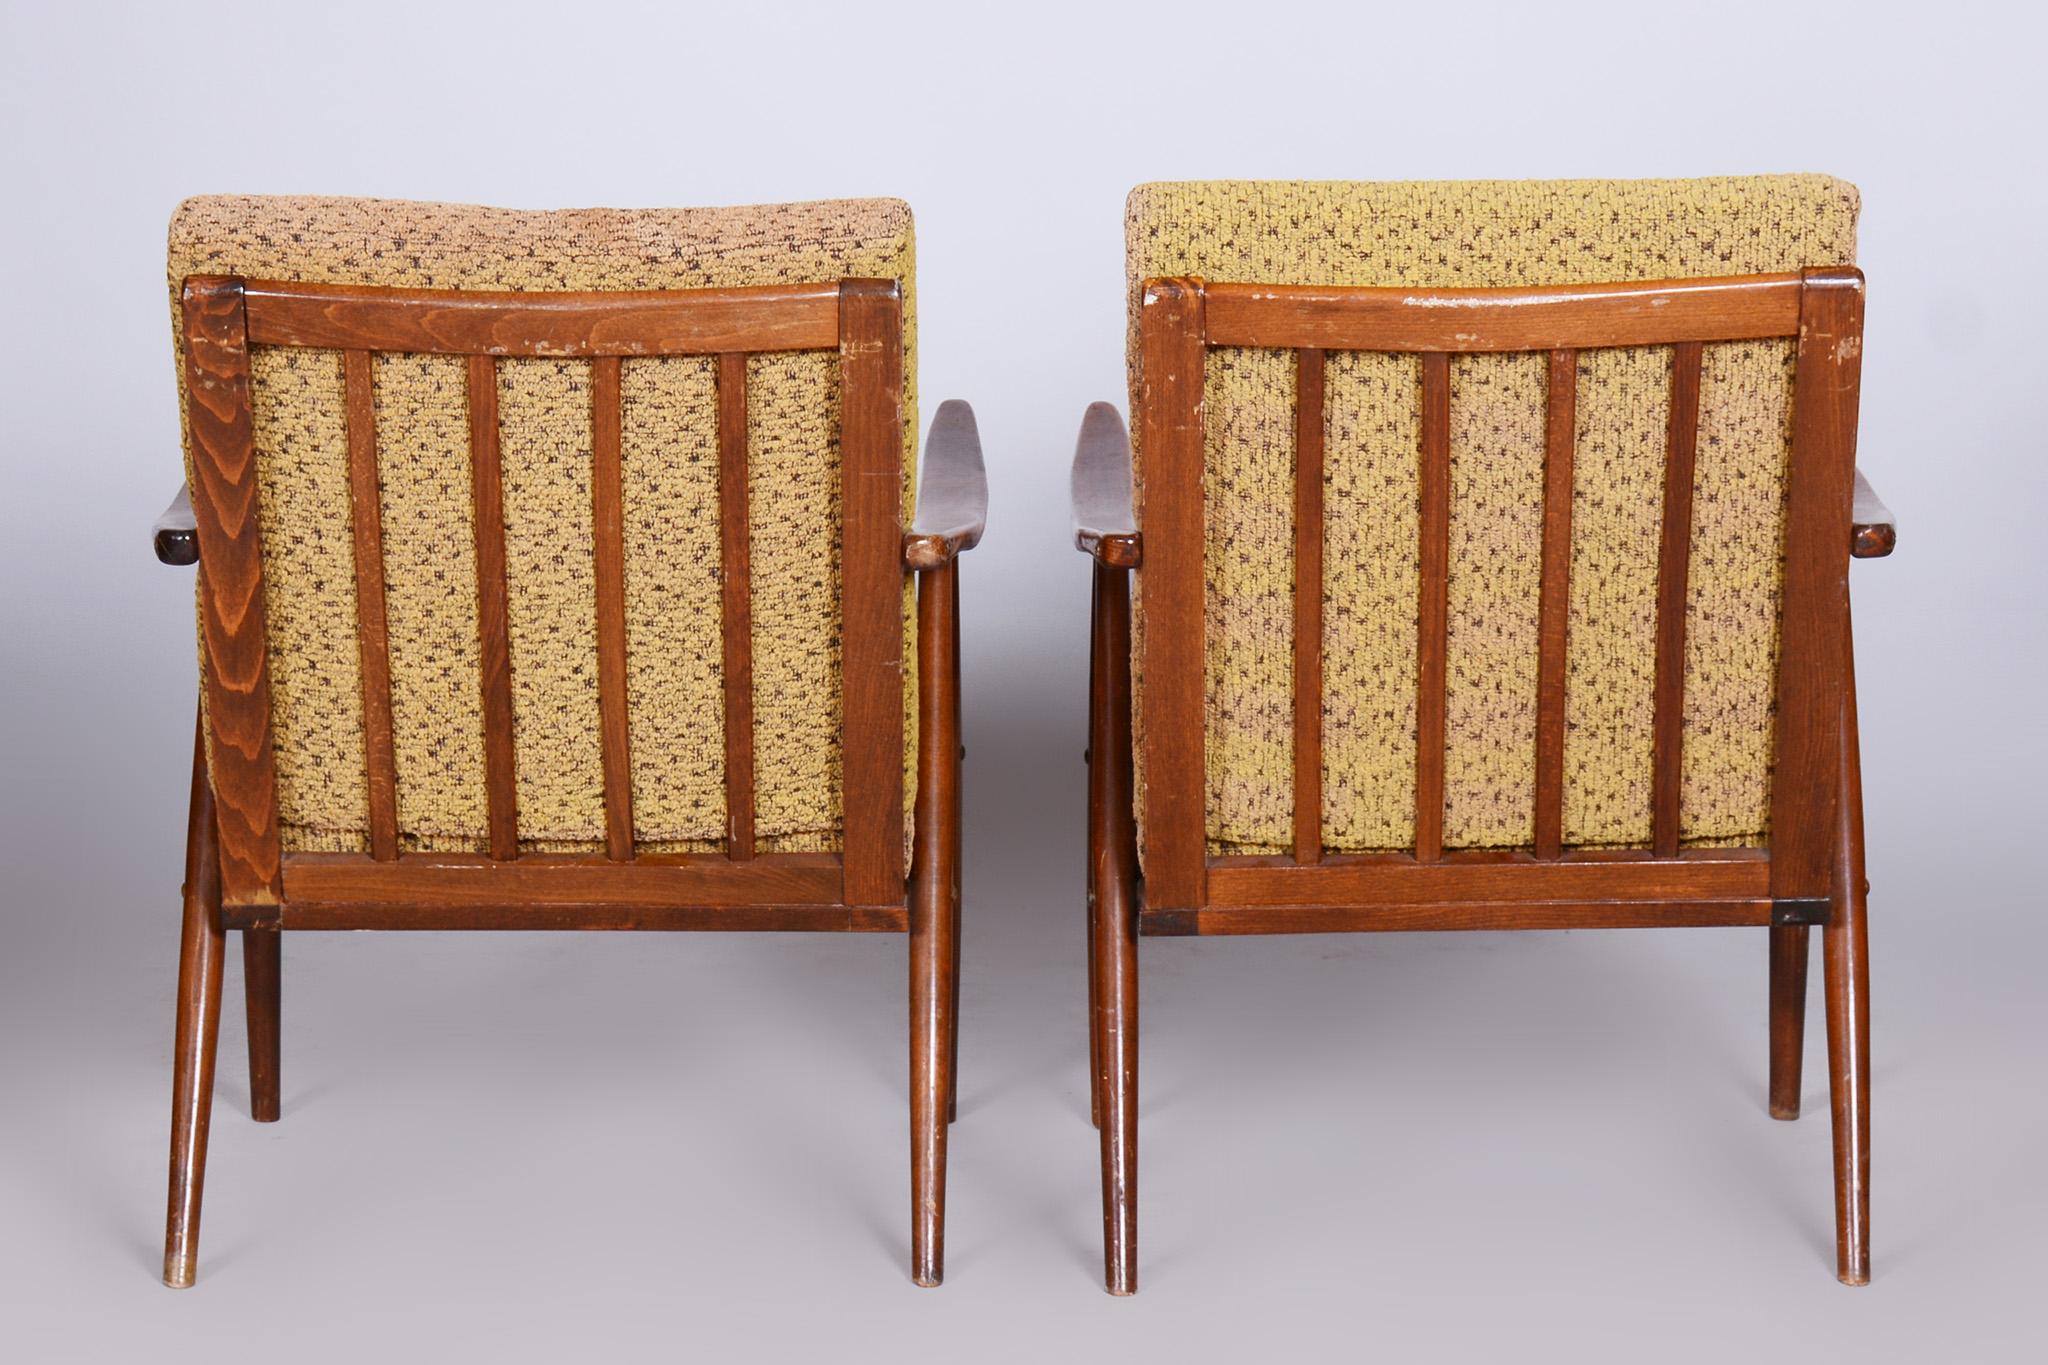 Pair of Midcentury Beech Armchairs, Úluv, Revived Polish, Czechia, 1960s For Sale 3